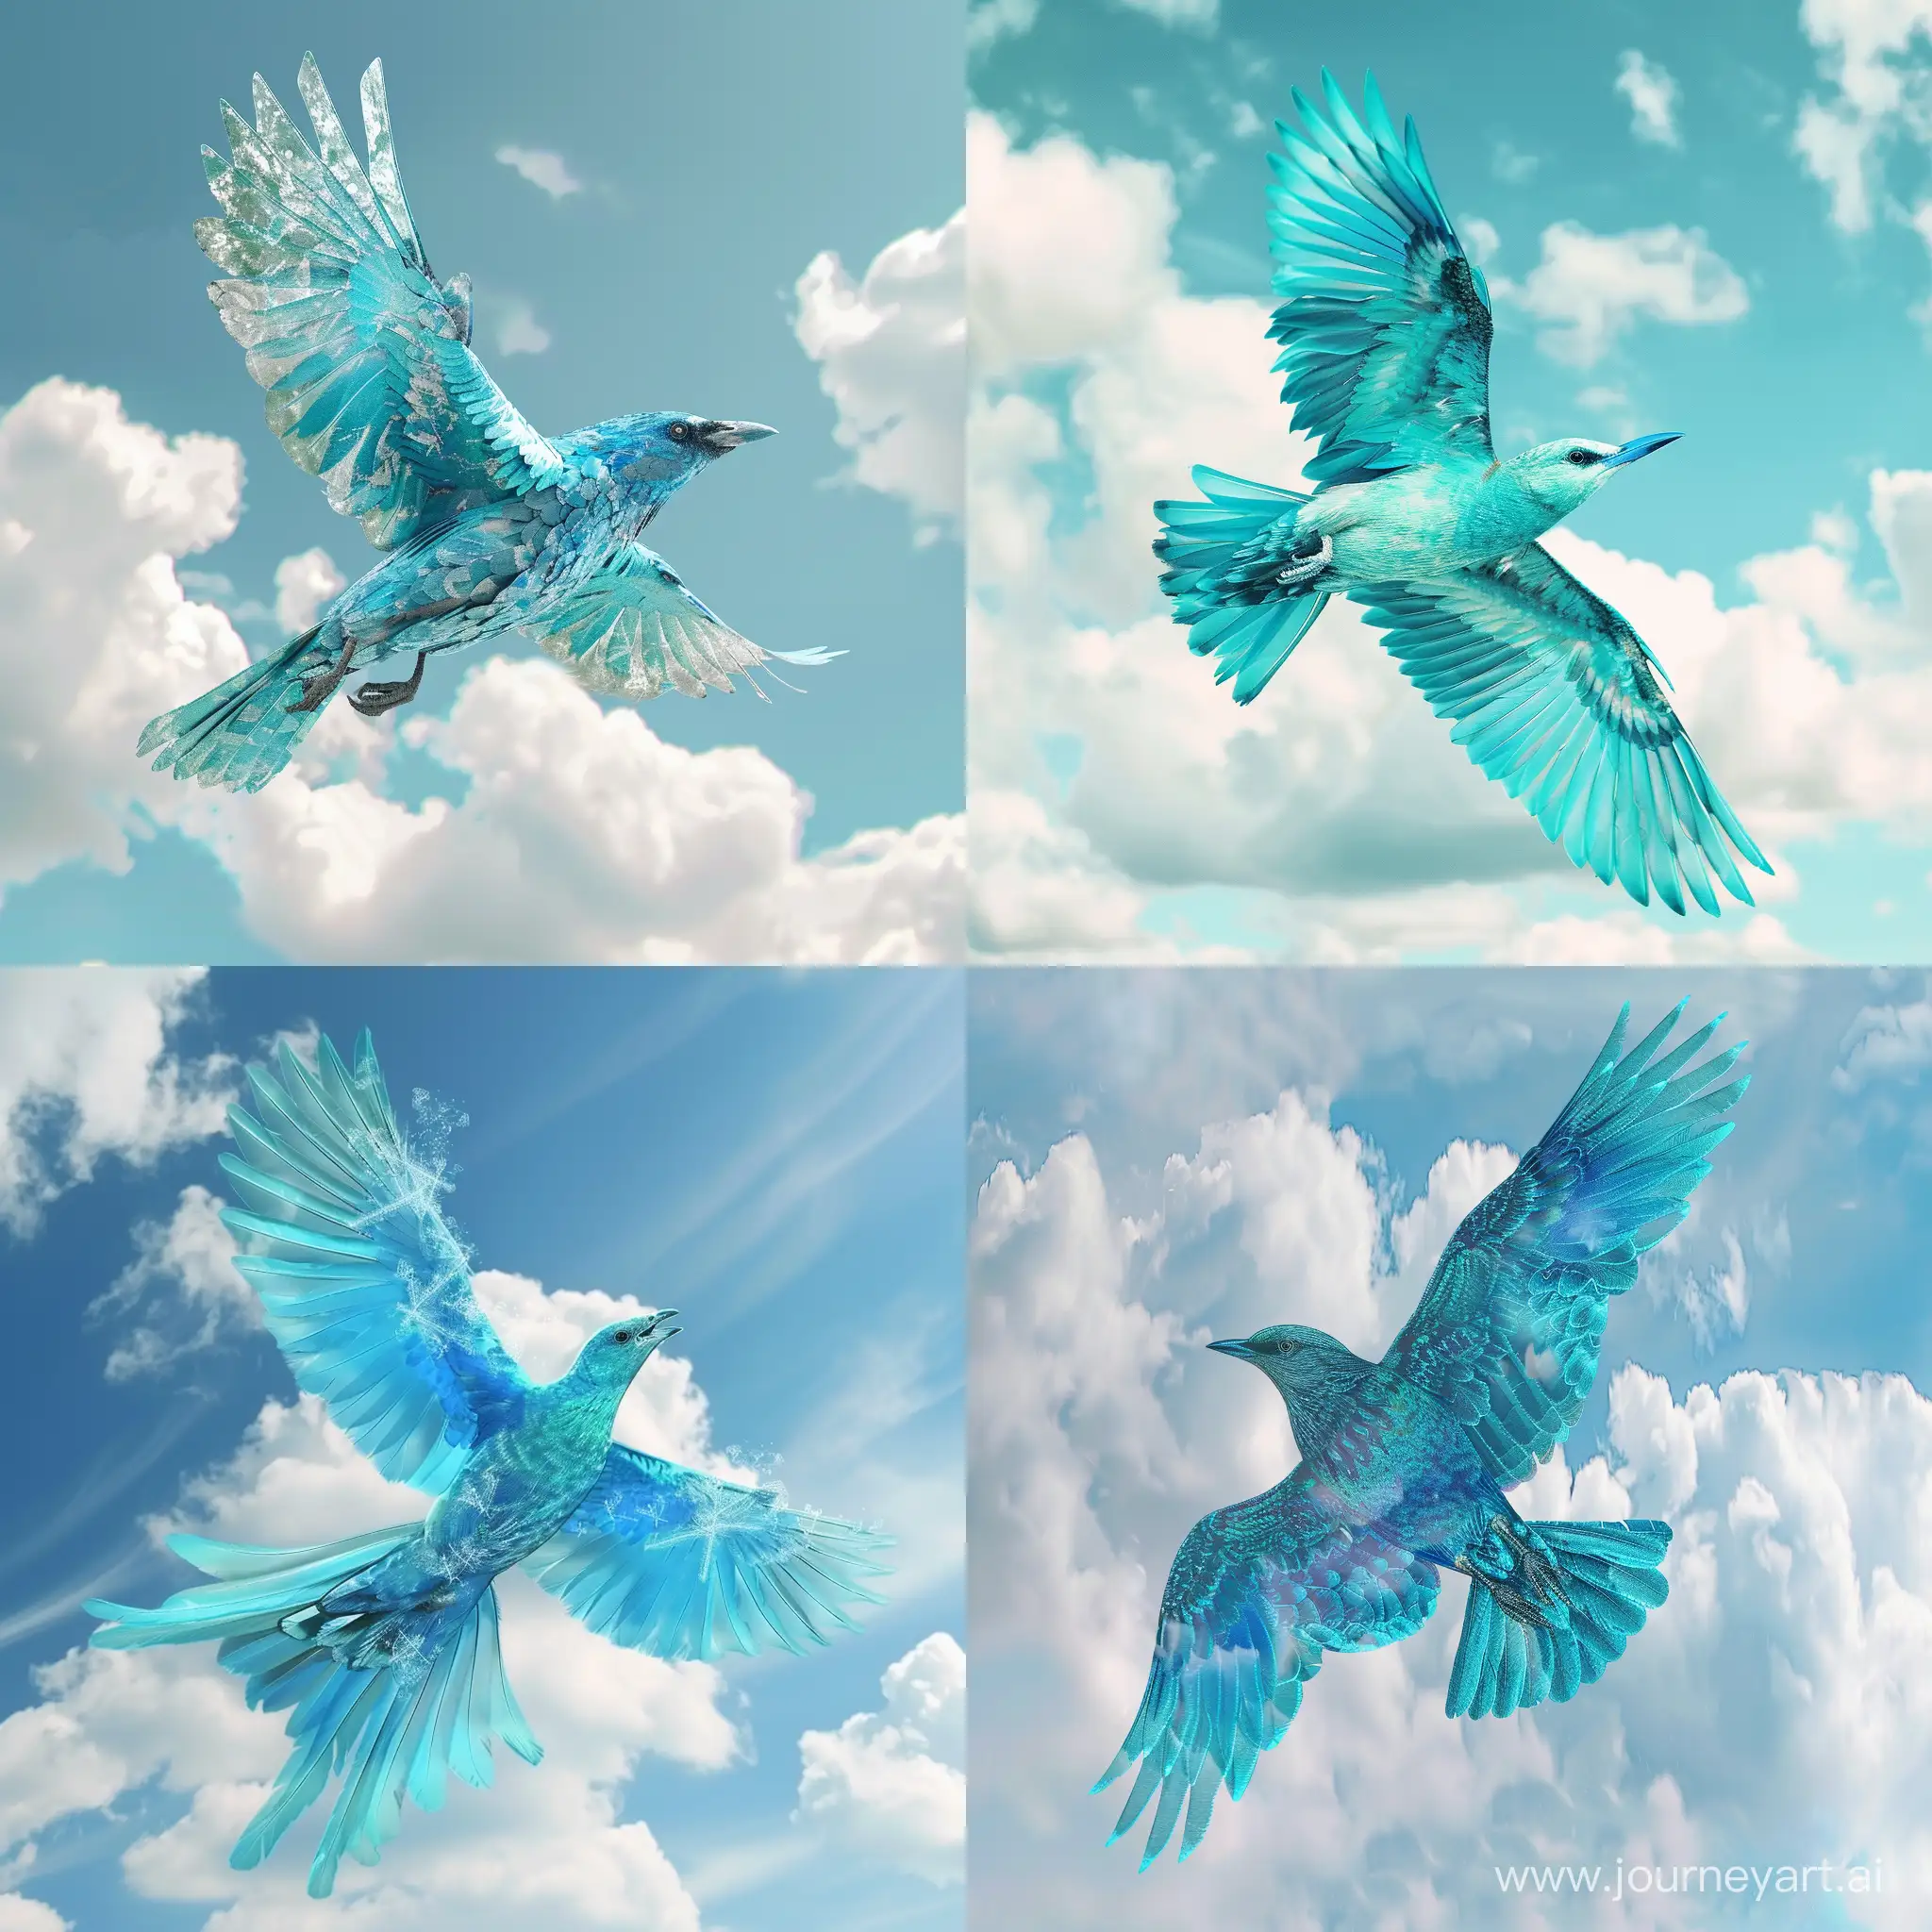 Turquoise-Bird-Soaring-Amidst-Billowing-Clouds